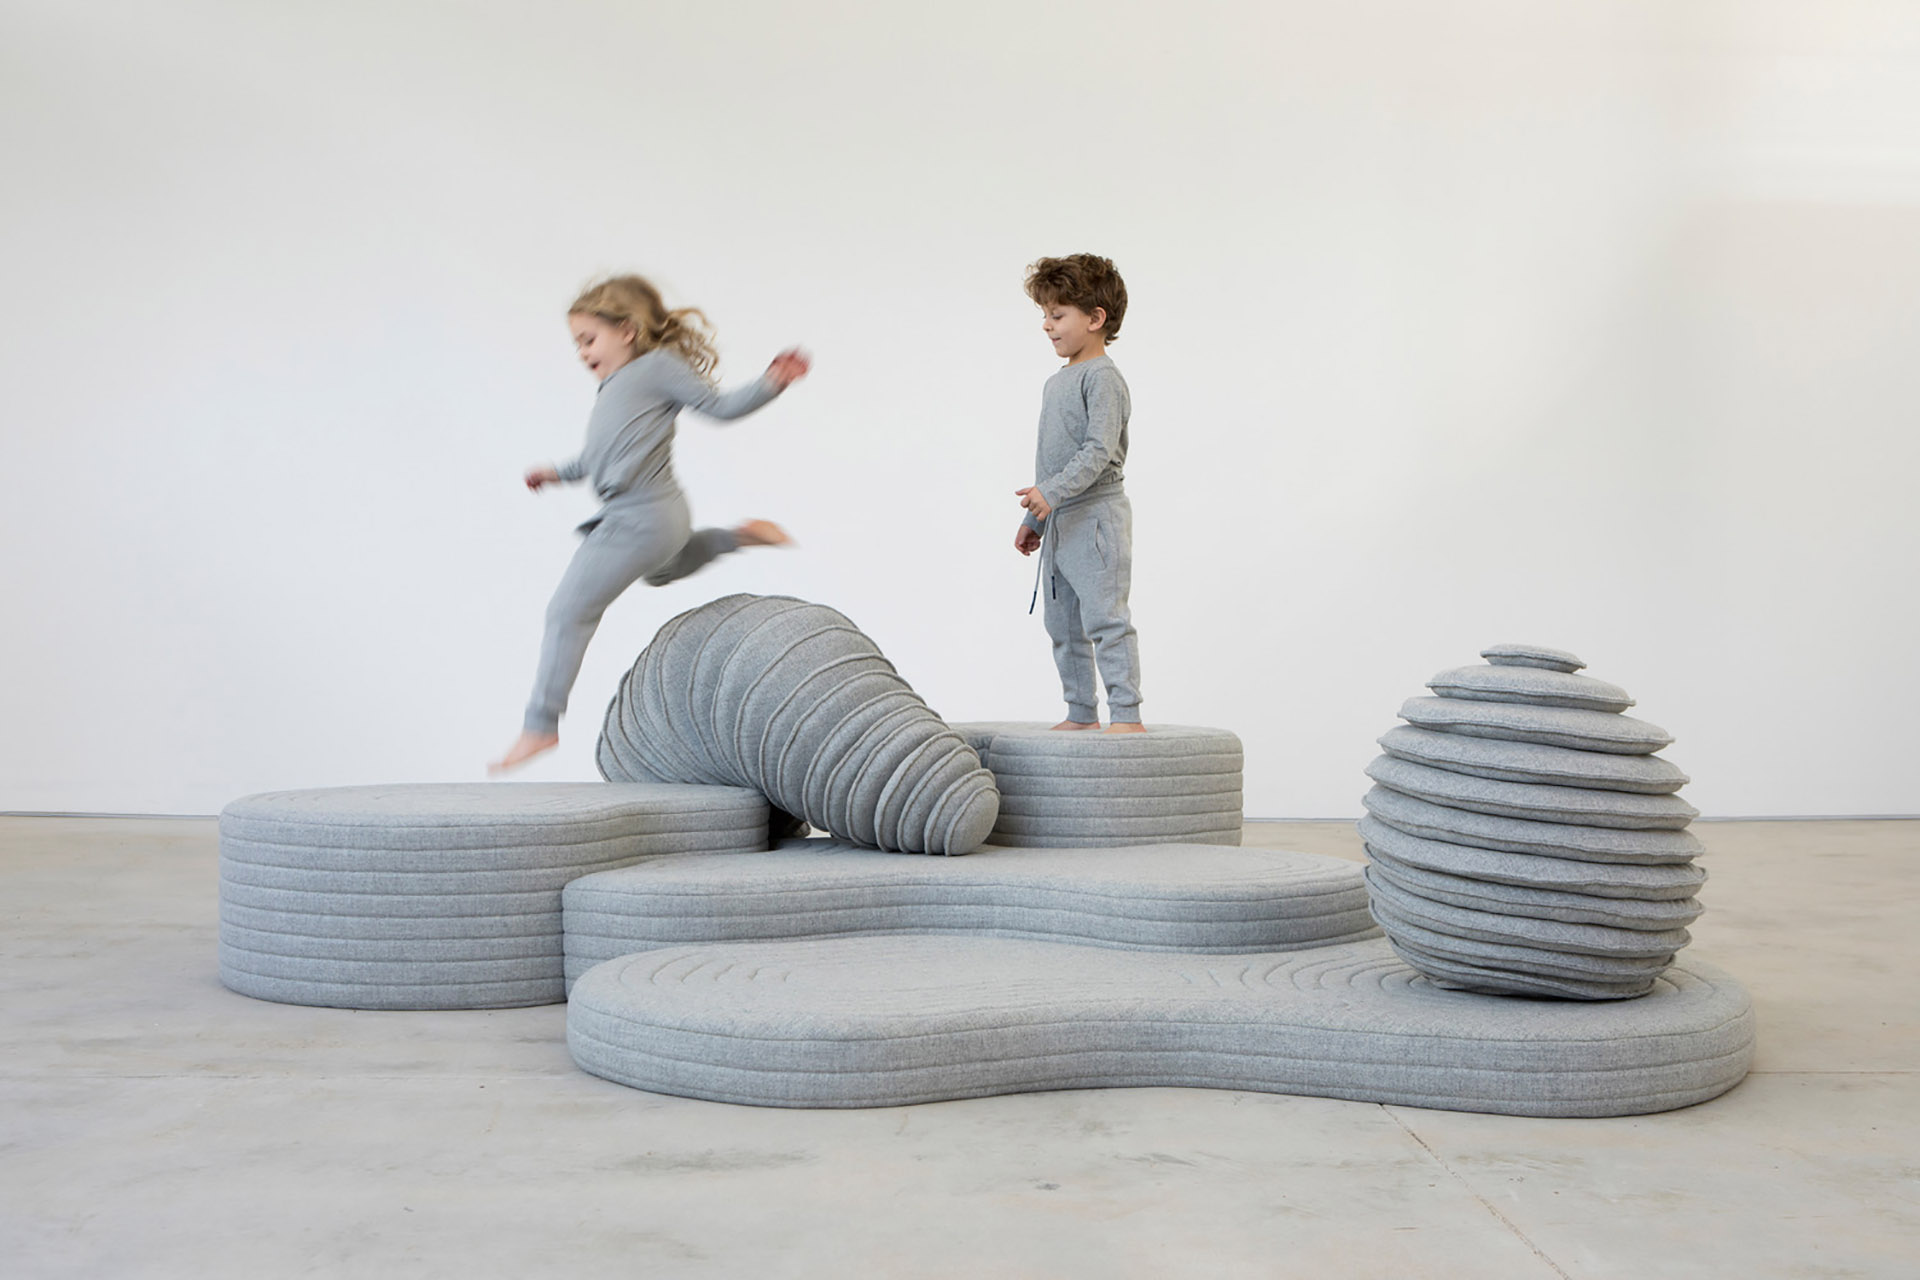 Installation by Sarit Shani Hay. A playful landscape inhabited by soft creatures